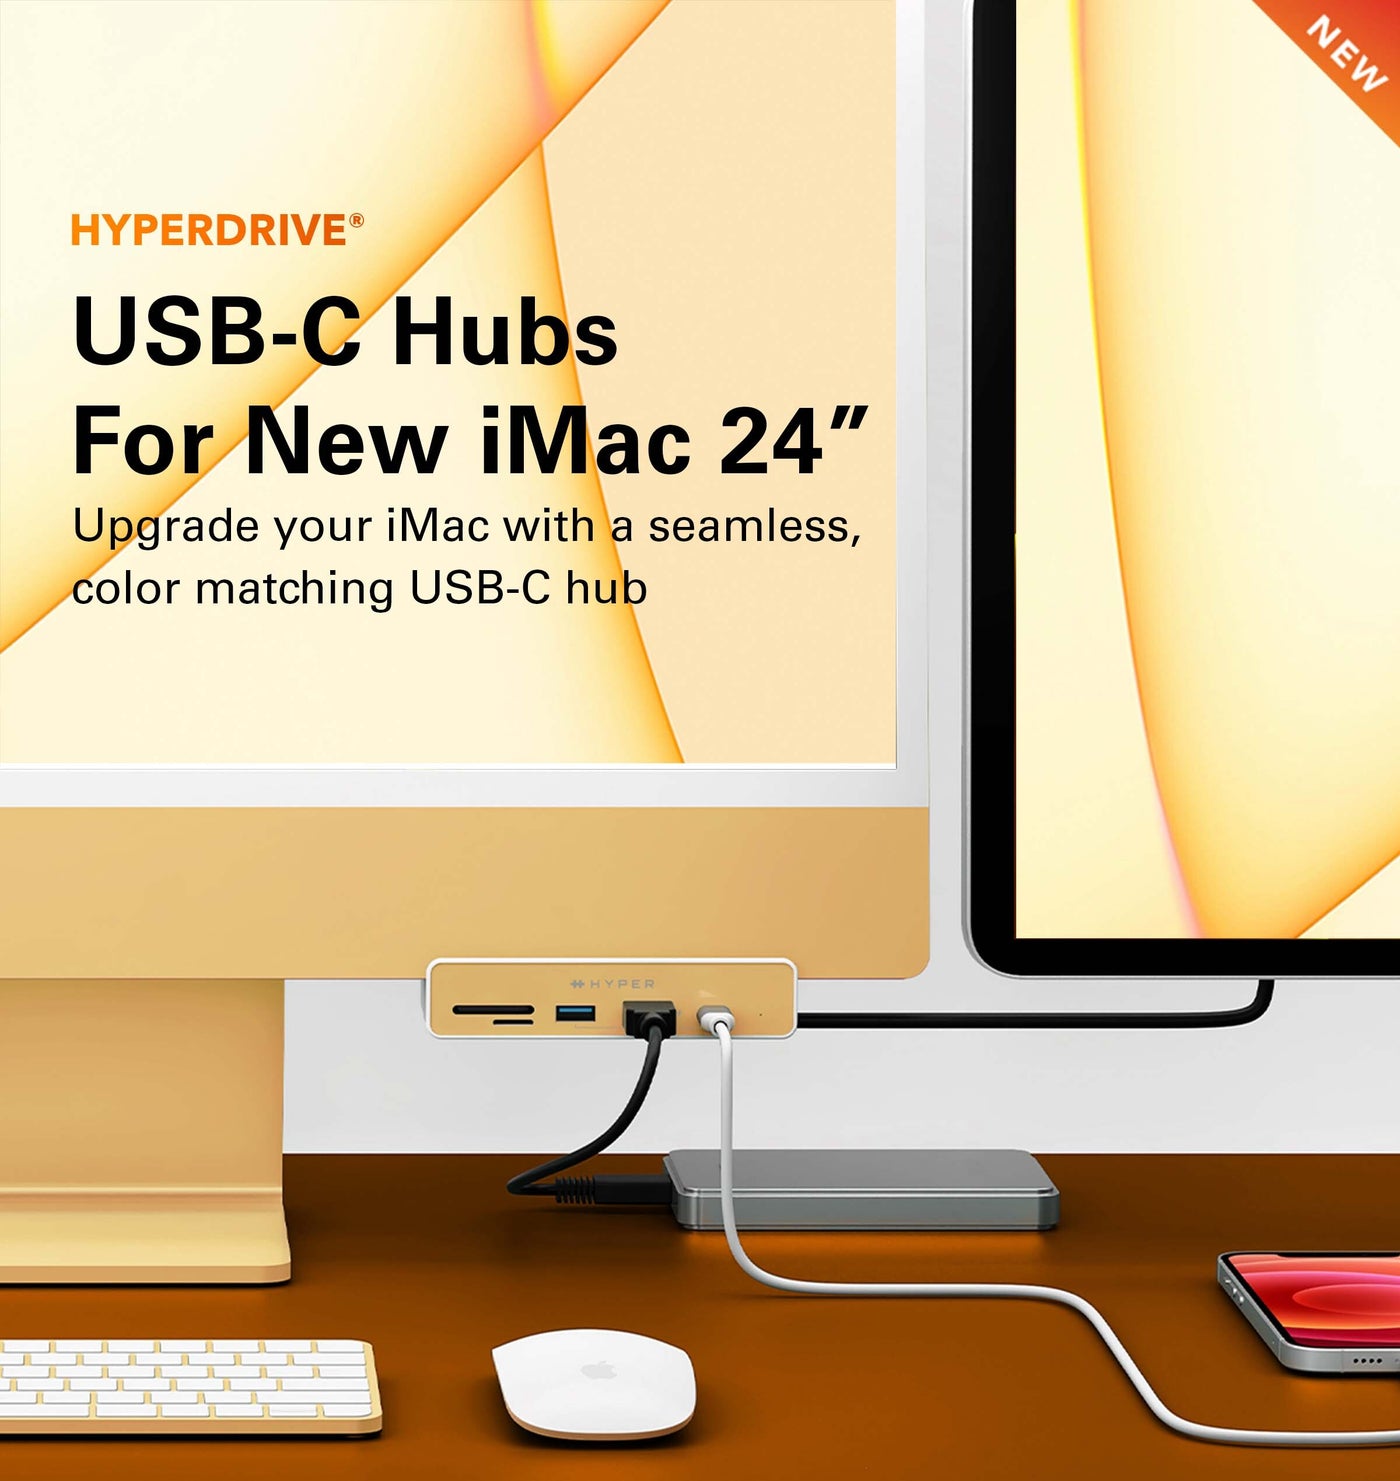 HYPER Launches HyperDrive 6-in-1 and HyperDrive 5-in-1 USB-C Hubs for new iMac 24”